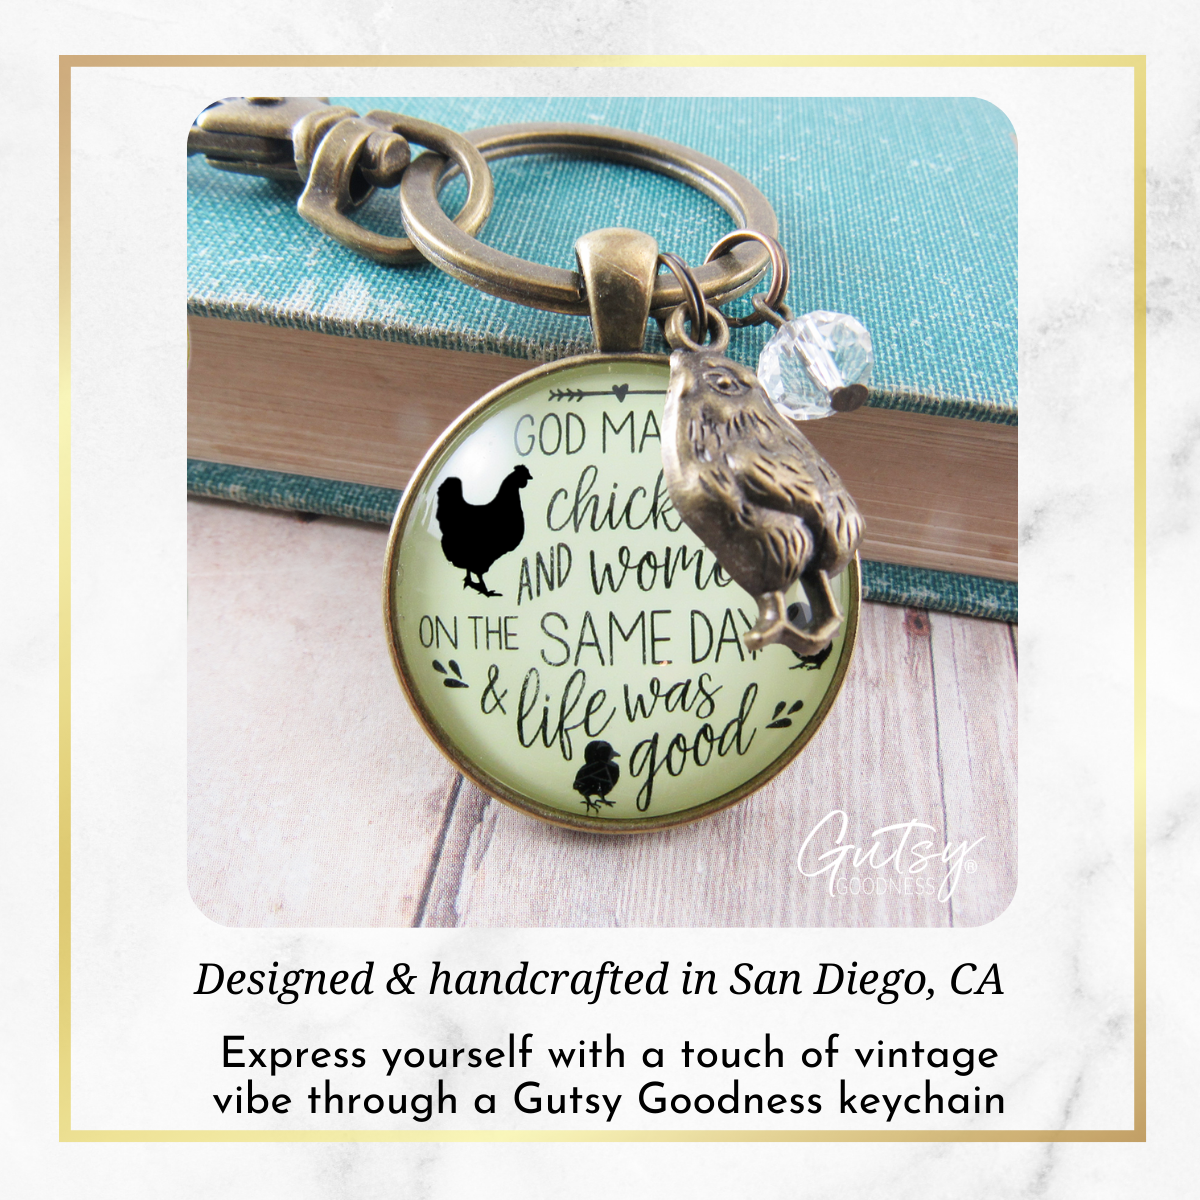 Chicken Keychain Funny God Made Chickens and Women It Was Good - Gutsy Goodness Handmade Jewelry;Chicken Keychain Funny God Made Chickens And Women It Was Good - Gutsy Goodness Handmade Jewelry Gifts